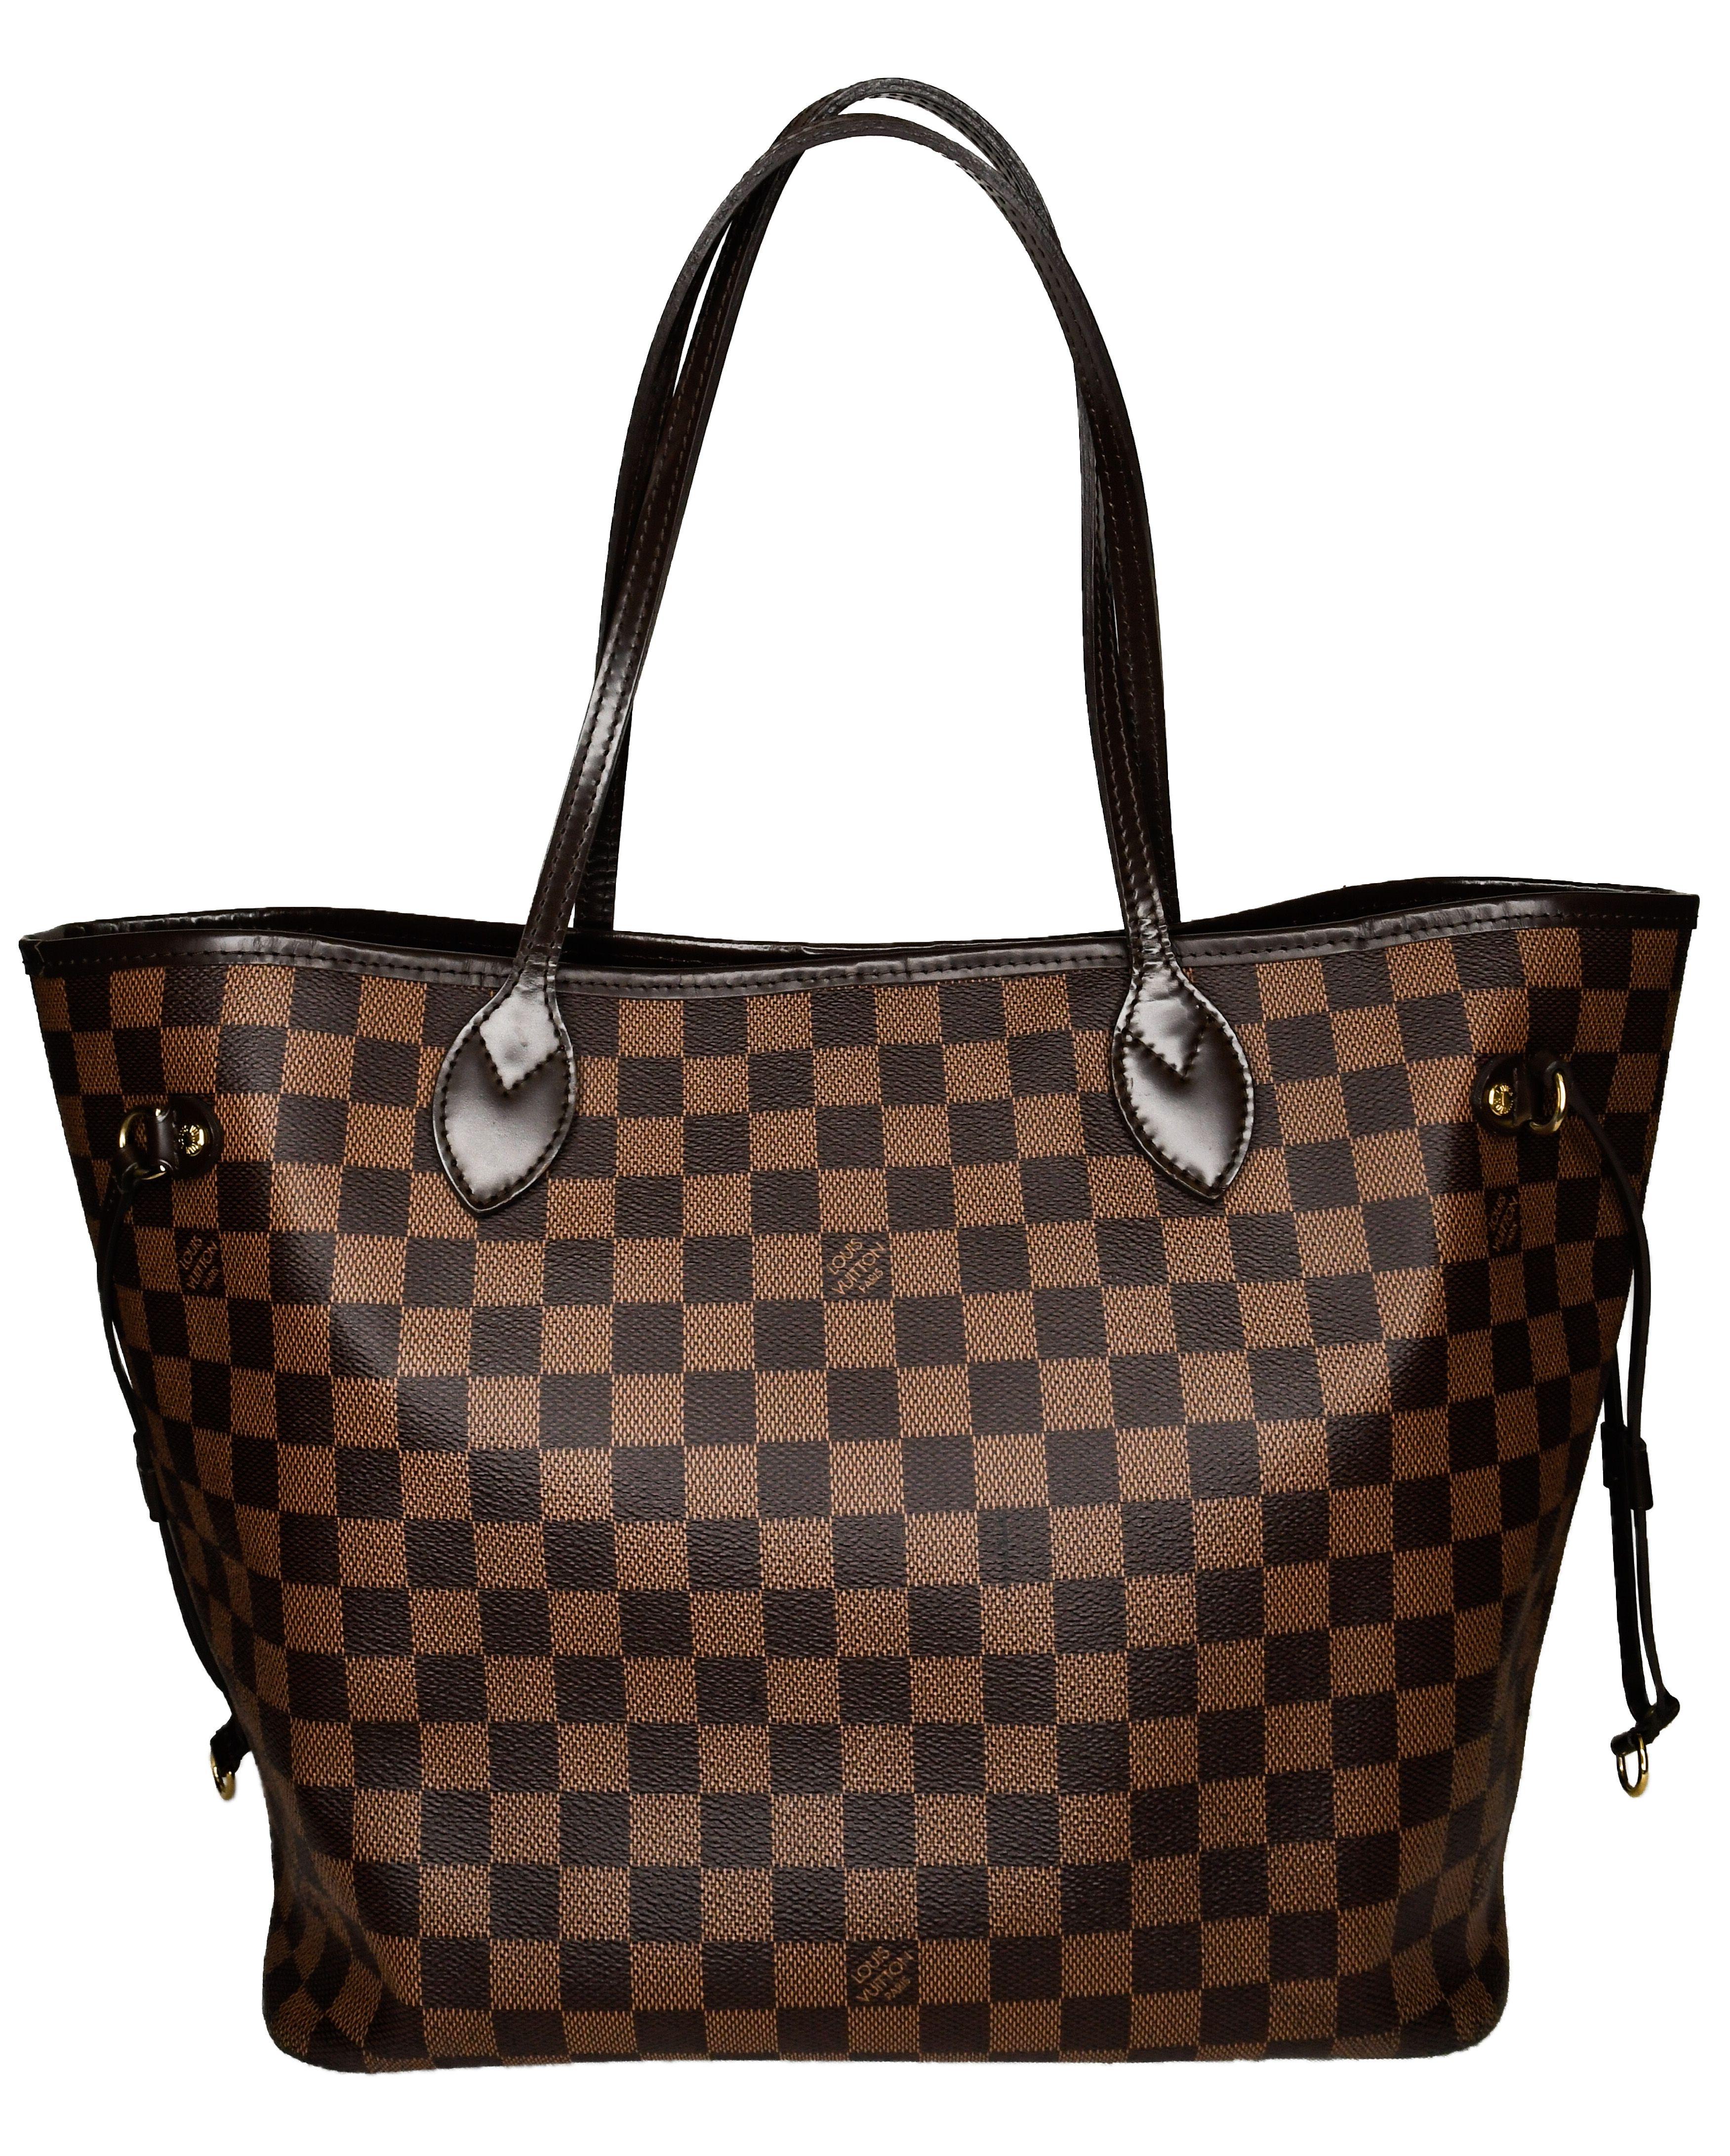 Introduced in 2007, the Neverfull tote has become one of Louis Vuitton's best selling bags.  No wonder!  Roomy tote features Damier Ebene canvas and leather trim.  Interior boasts red and black stripes, zippered pocket and D ring.  Removable,